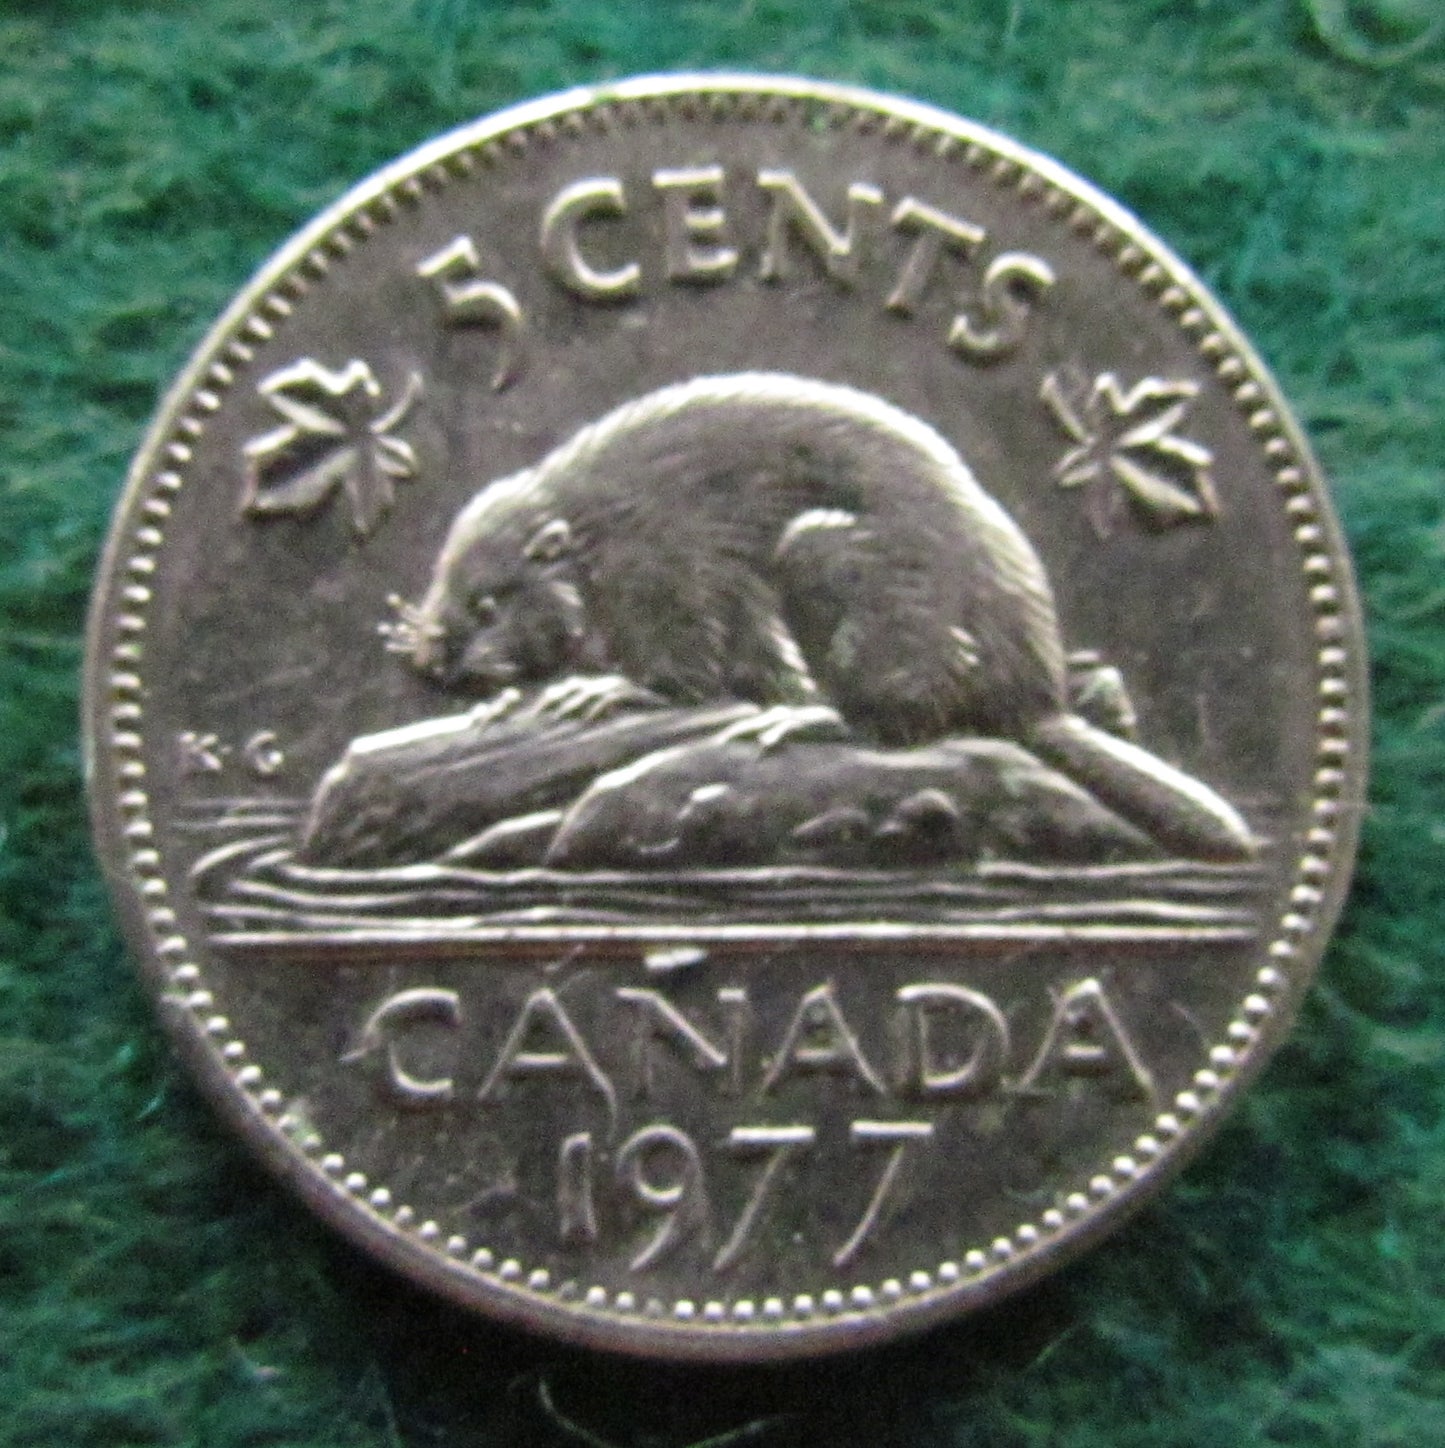 Canada 1977 5 Cent King George V Coin